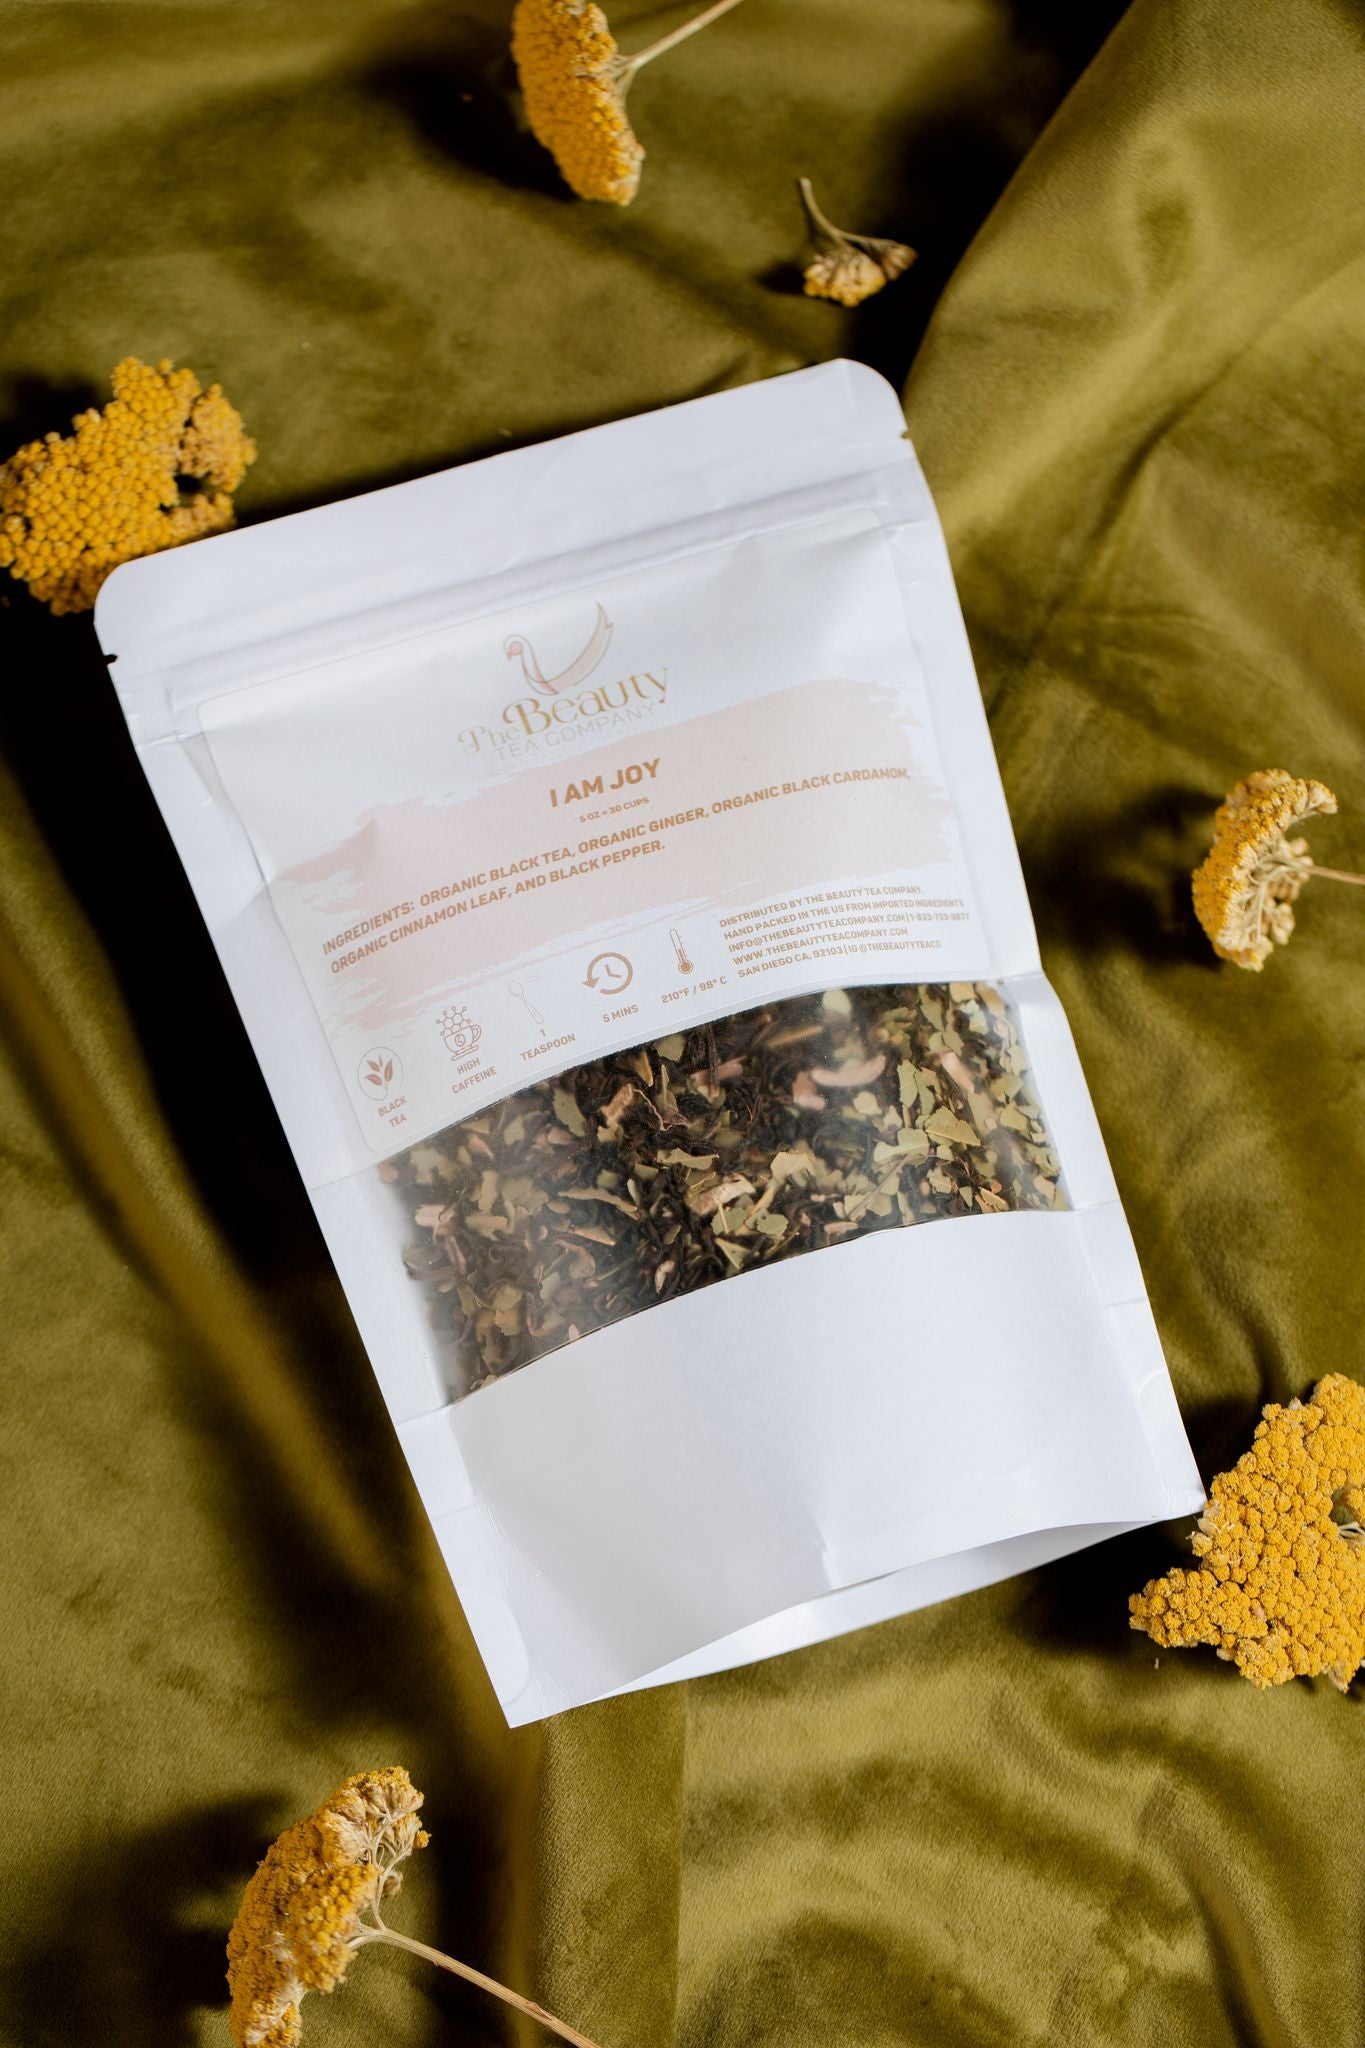 I am Joy, Chai, exceptional fusion of the finest ingredients creates a -  Thebeautyteacompany